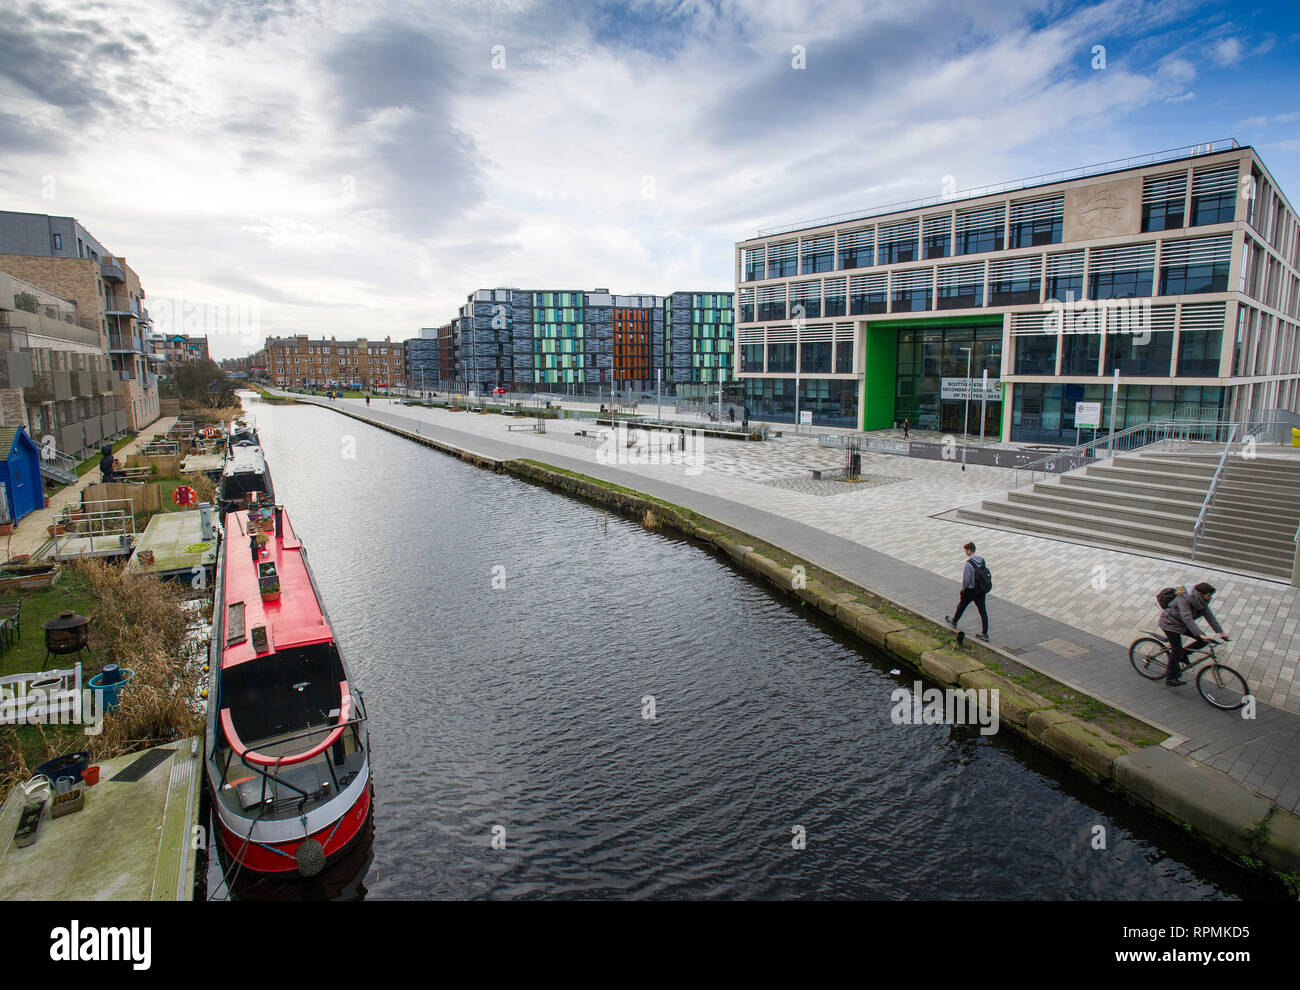 The new Boroughmuir High School overlooking the Union canal in Edinburgh. Stock Photo